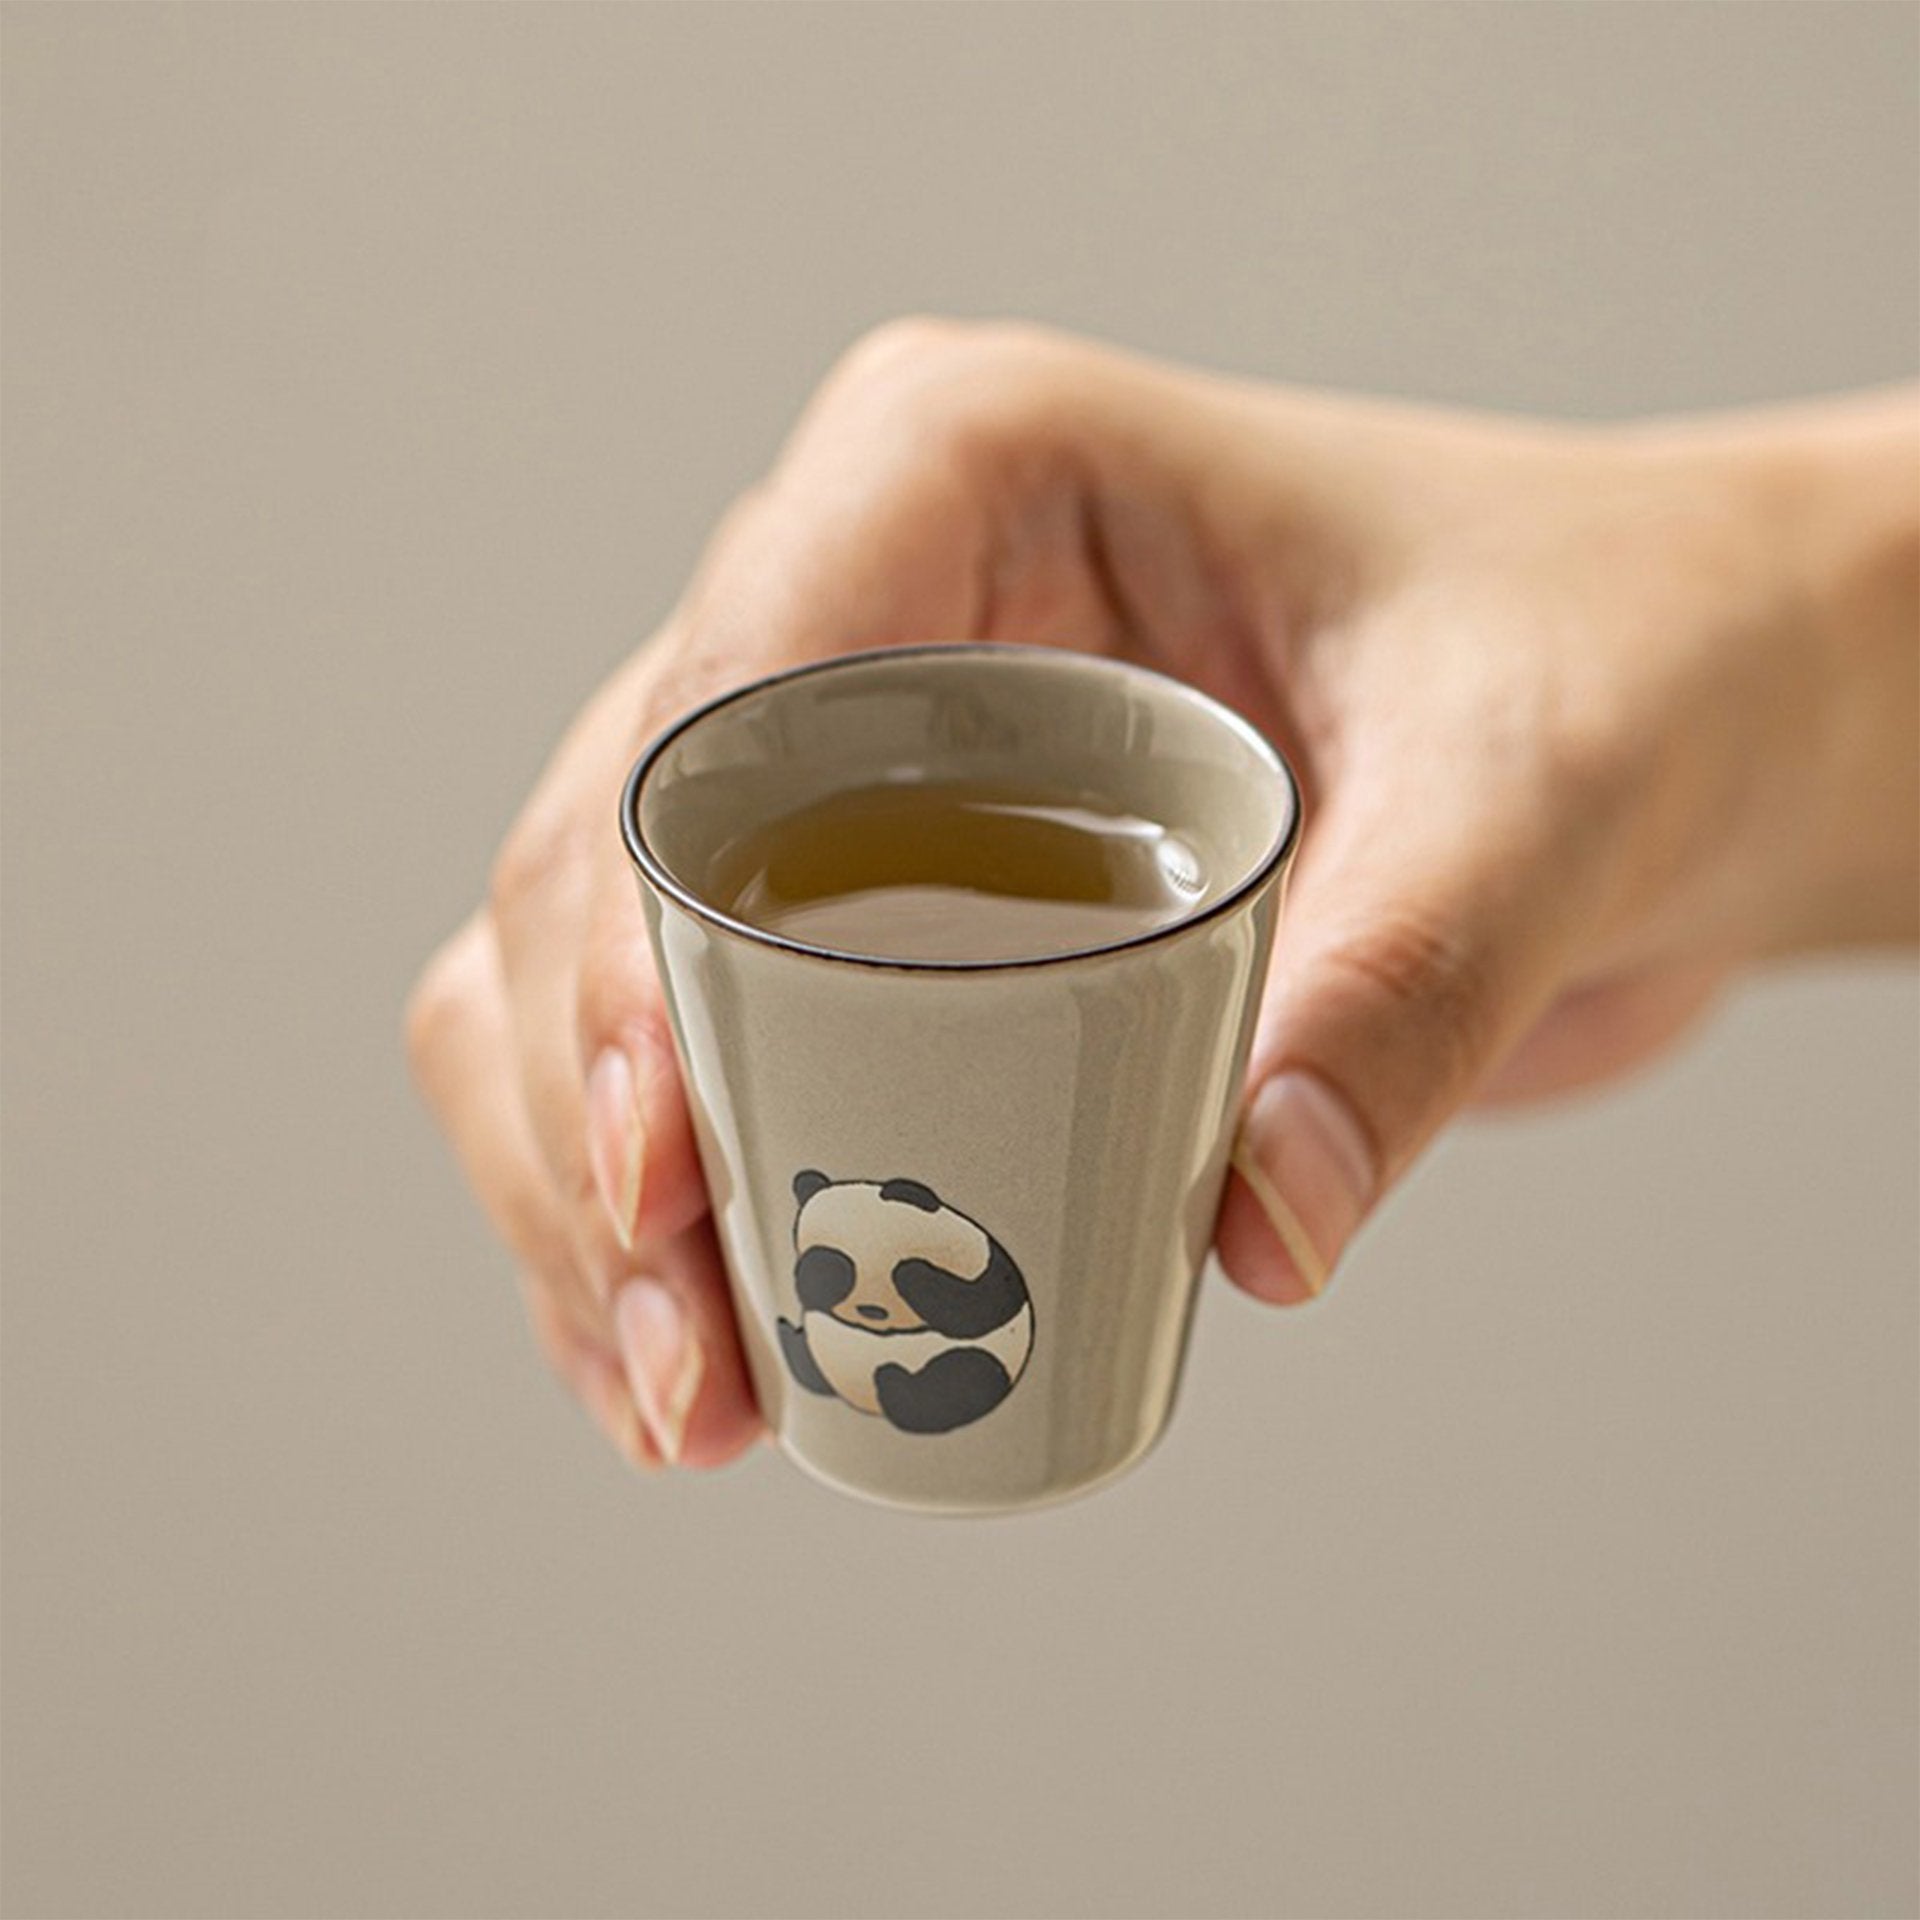 Hand holding a teacup with tea, panda design visible from the front.